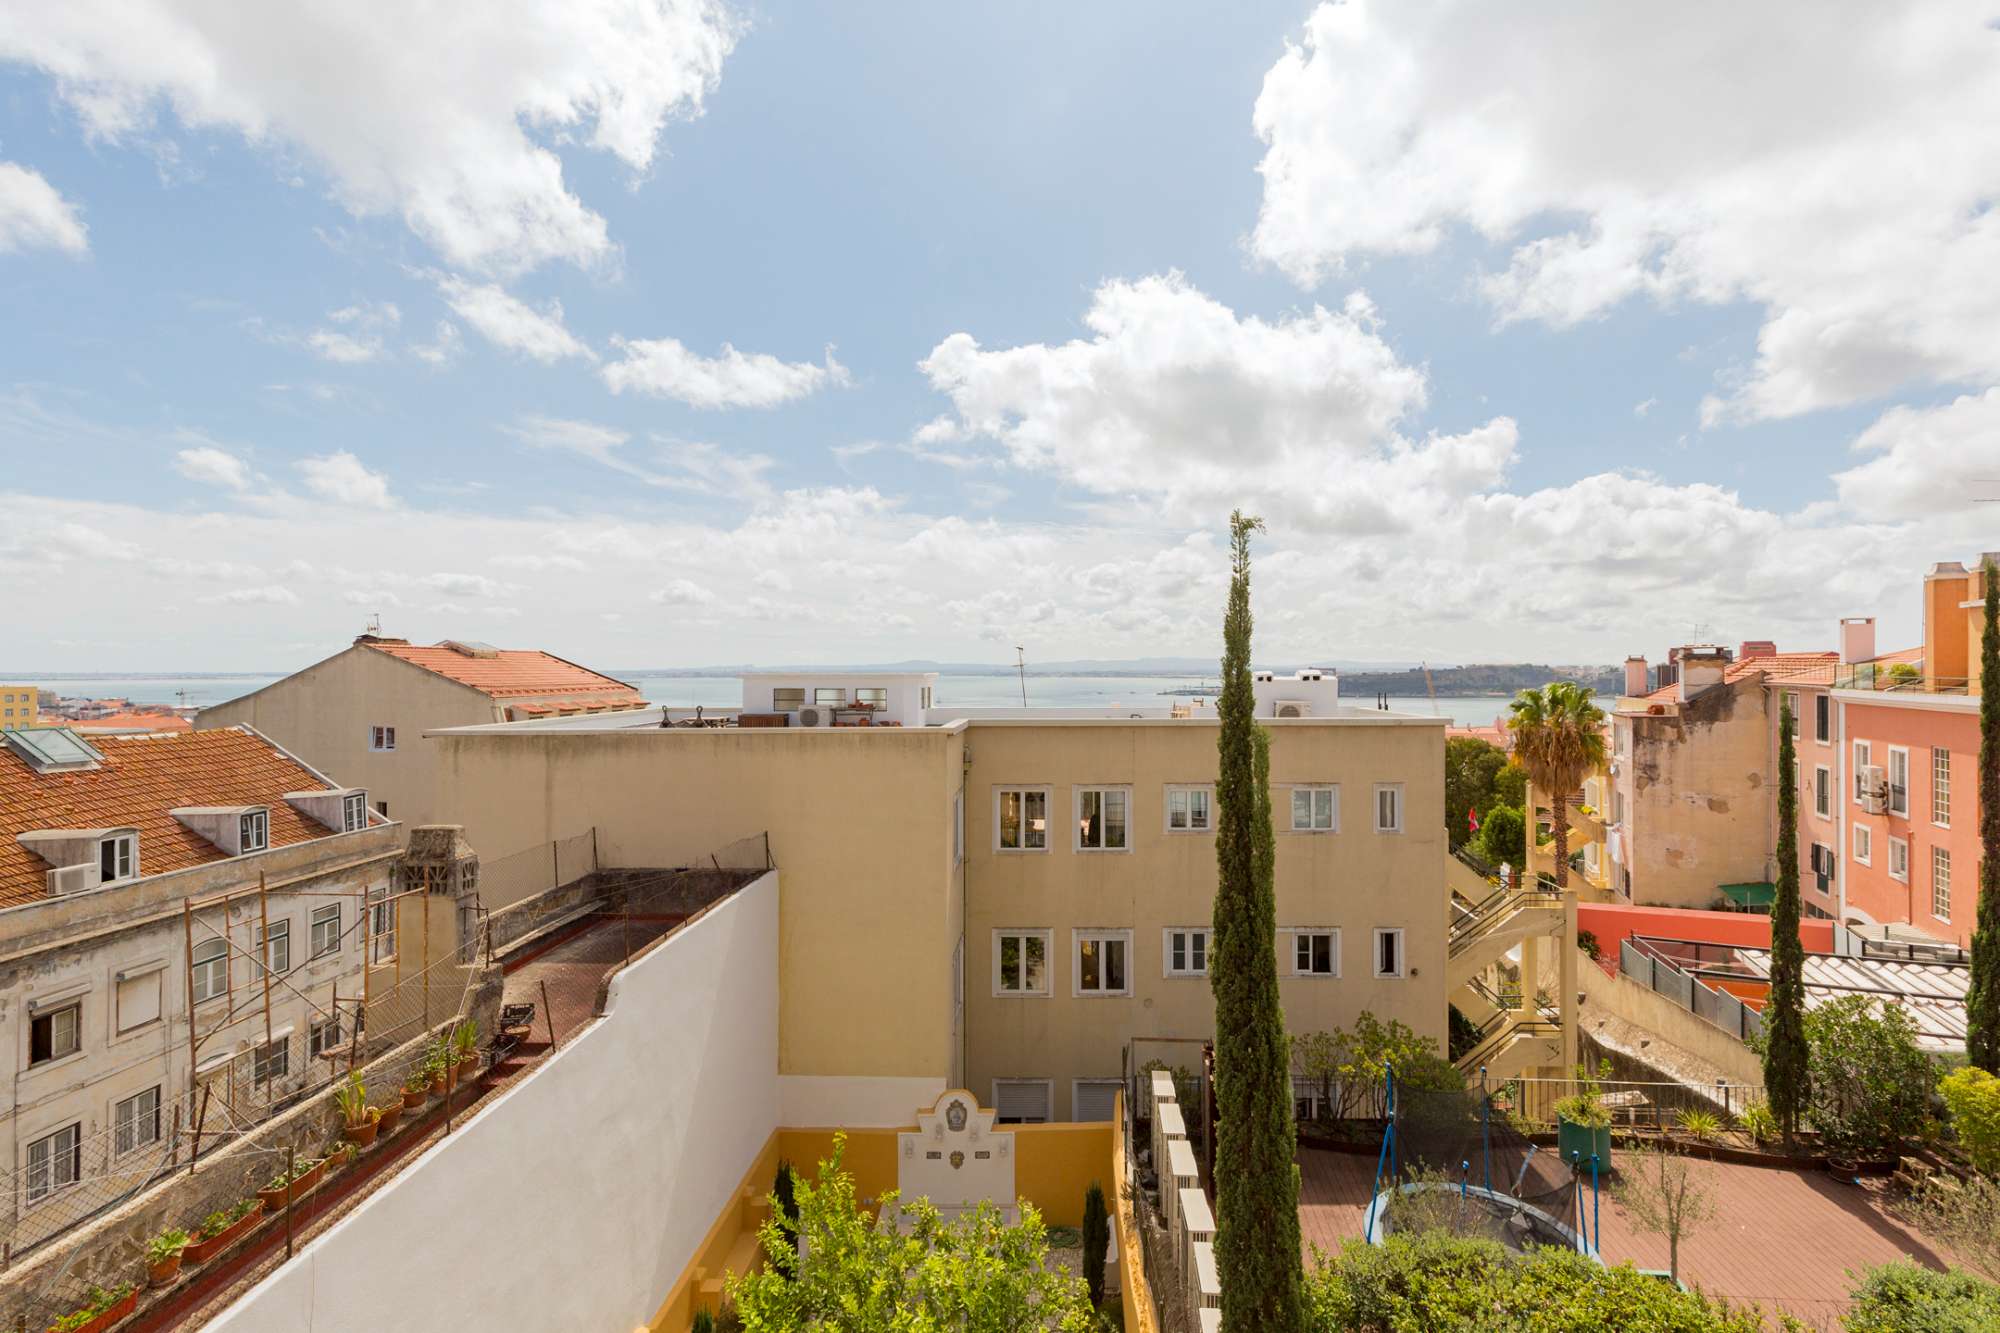 2-bedroom apartment with 95 sqm total area, for sale, in Lapa